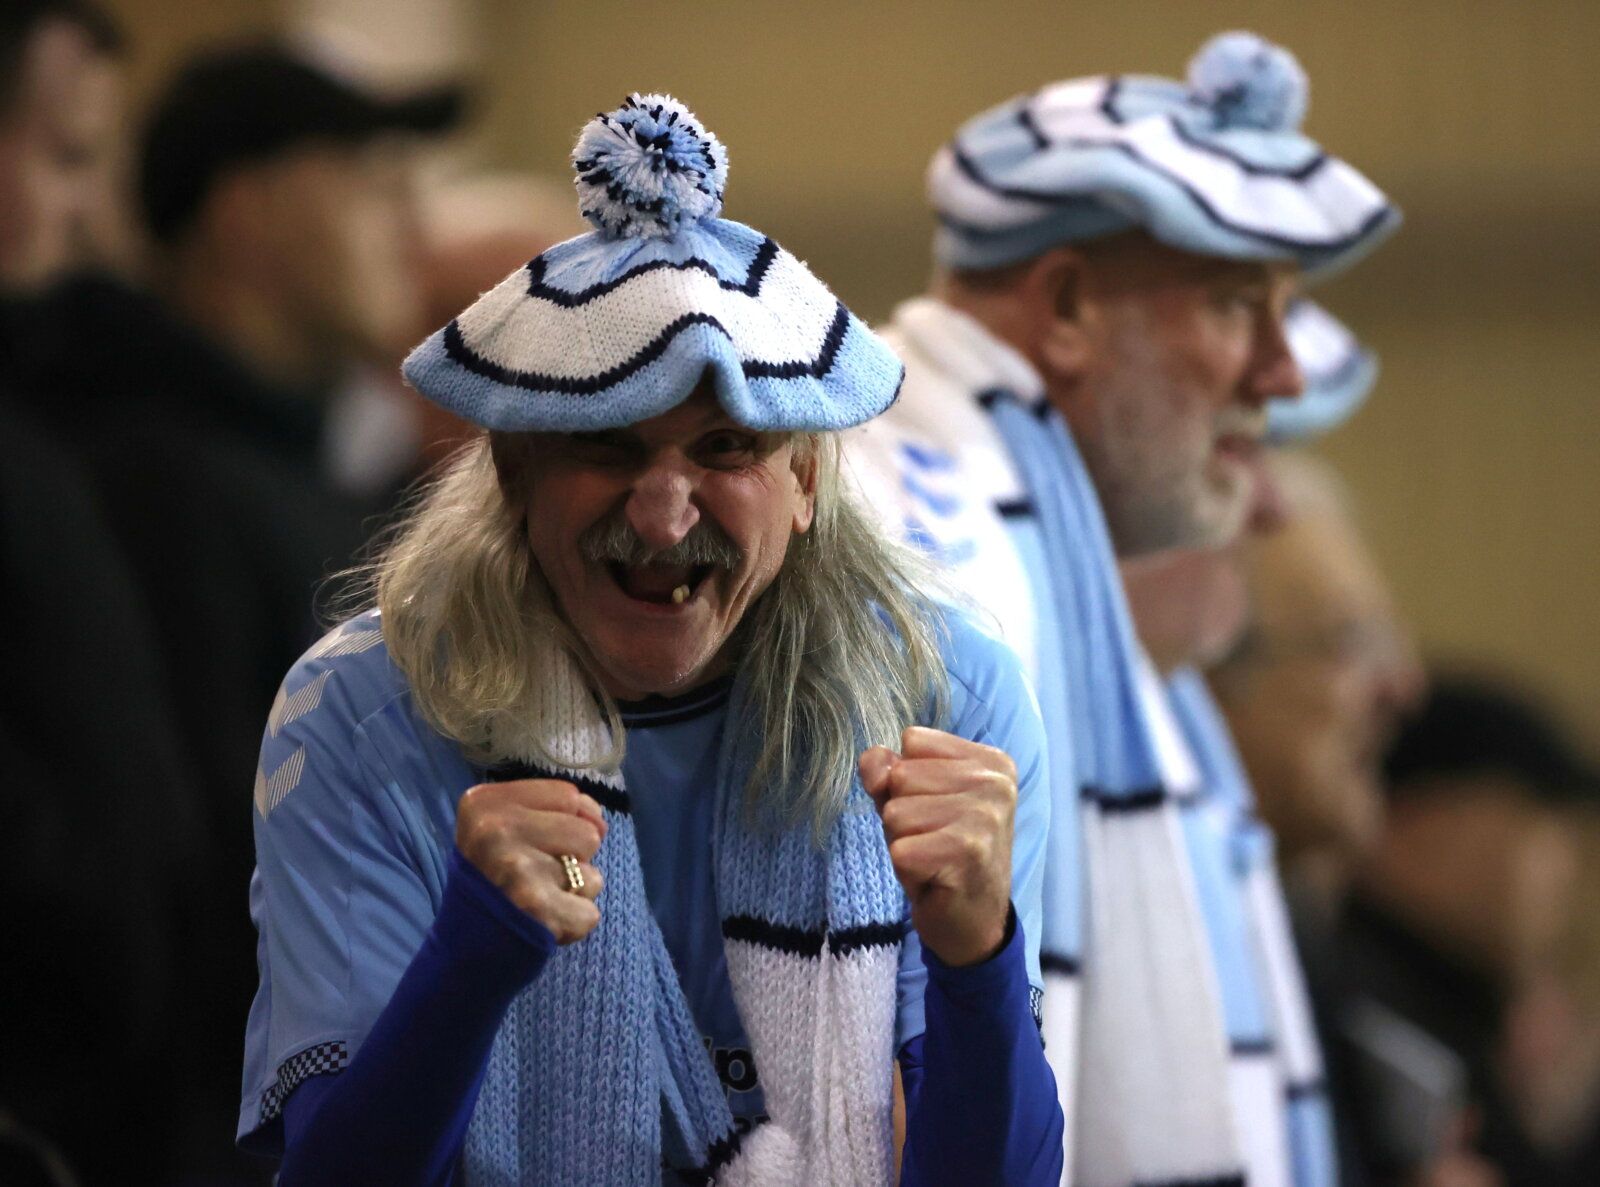 Soccer Football - Championship - Preston North End v Coventry City - Deepdale, Preston, Britain - October 20, 2021  A Coventry City fan reacts    Action Images/Molly Darlington  EDITORIAL USE ONLY. No use with unauthorized audio, video, data, fixture lists, club/league logos or 